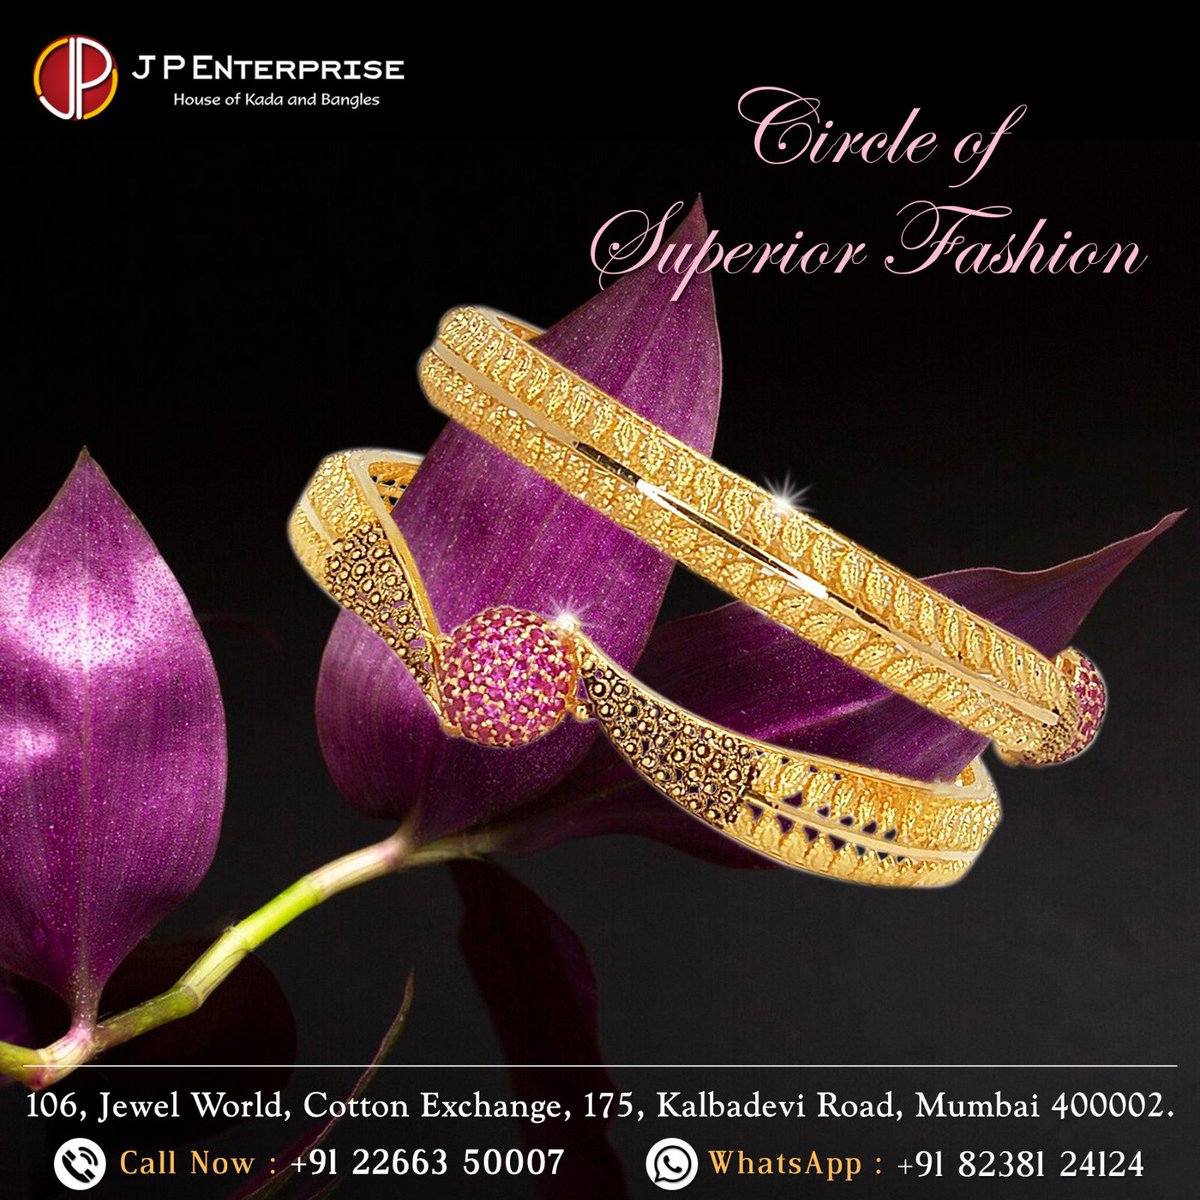 Feel your heart skip a beat with his grandiose gold bangles available at J P enterprise. 

#beautifuljewellery #royaljewellery #goldjewellery #bangles #goldbangles #craftsmanship #classicjewellery  #mumbaijewellers #indianjewellery #indianjeweller